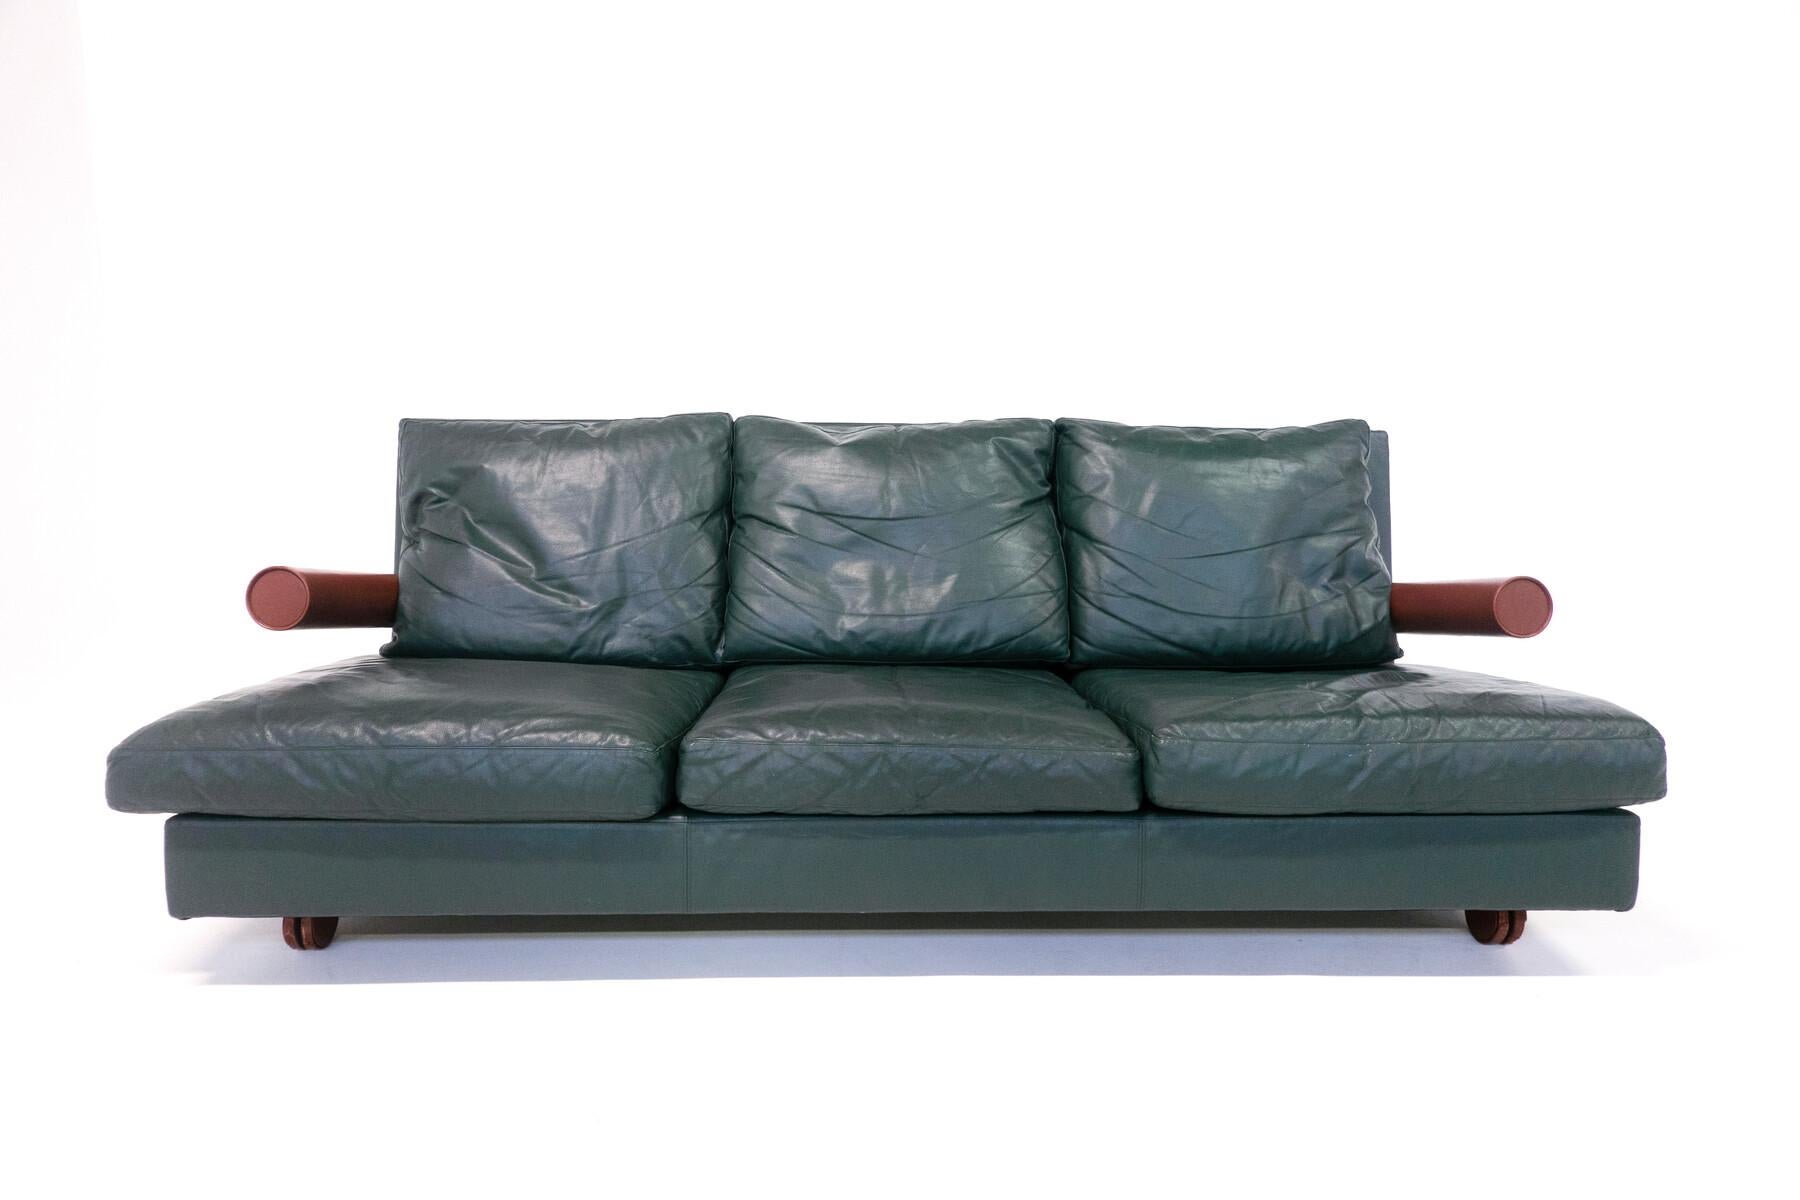 Faux Leather Mid-Century Modern Baisity Sofa by Antonio Citterio for B&B Italia, 1980s, Two For Sale